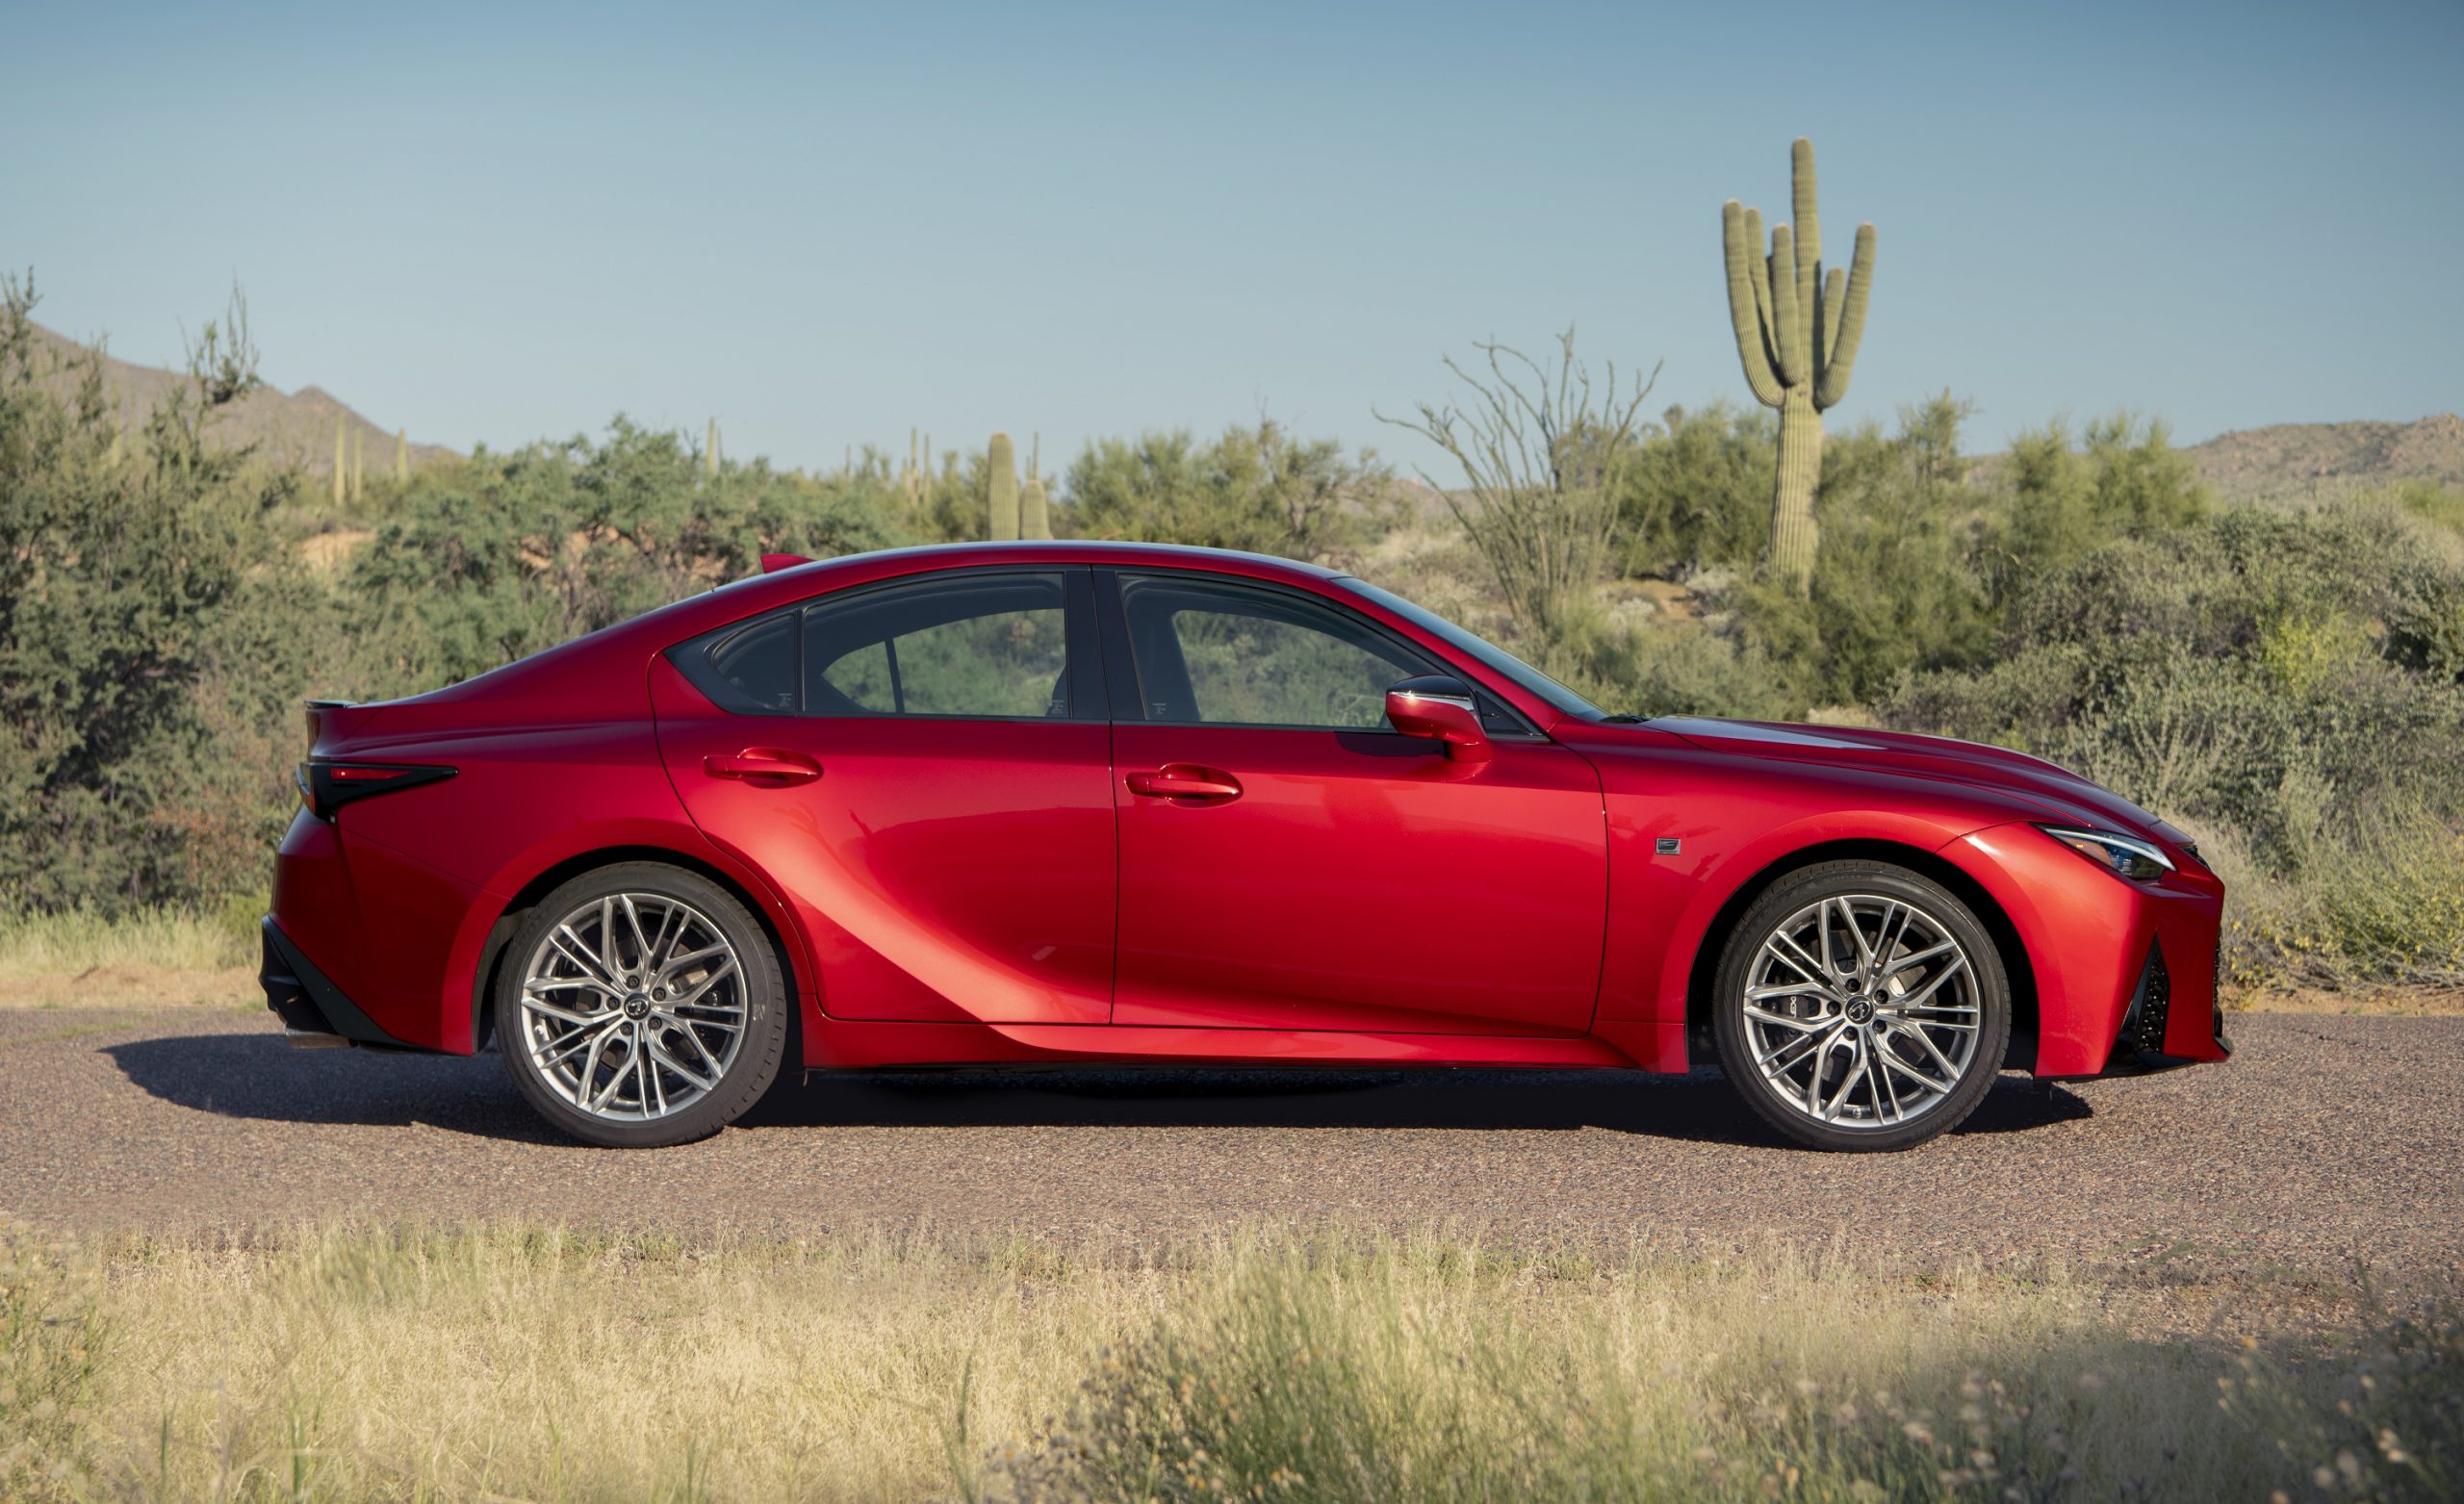 A red Lexus IS 500 shot in profile in the desert with cacti in the background